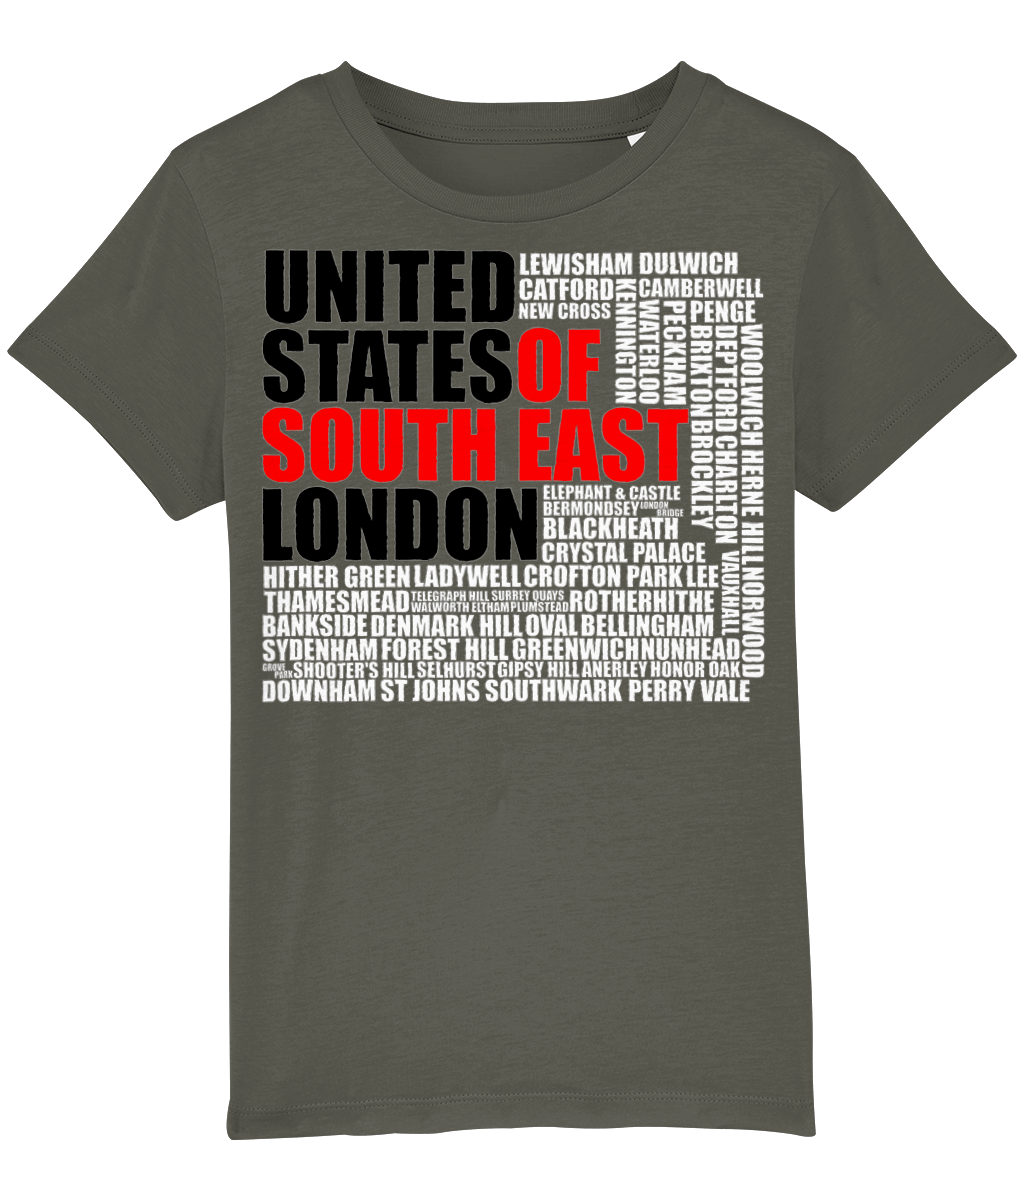 United States of South East London Kids T-Shirt